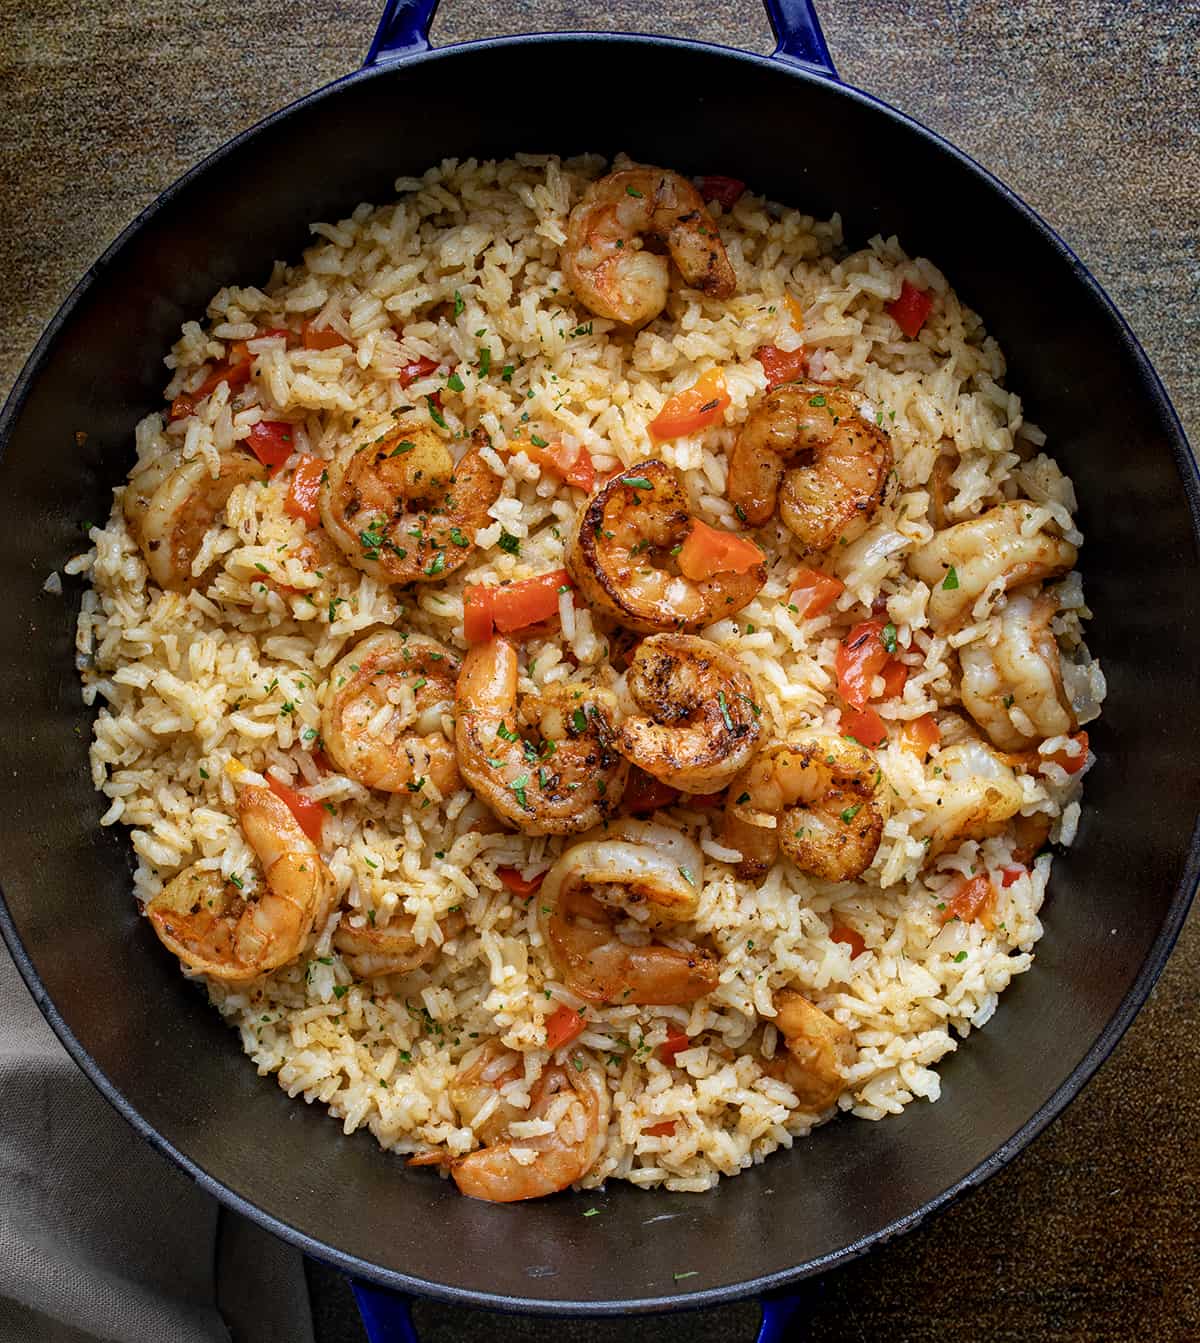 Pan of Cajun Shrimp and Rice on a Wooden Table  from Overhead.